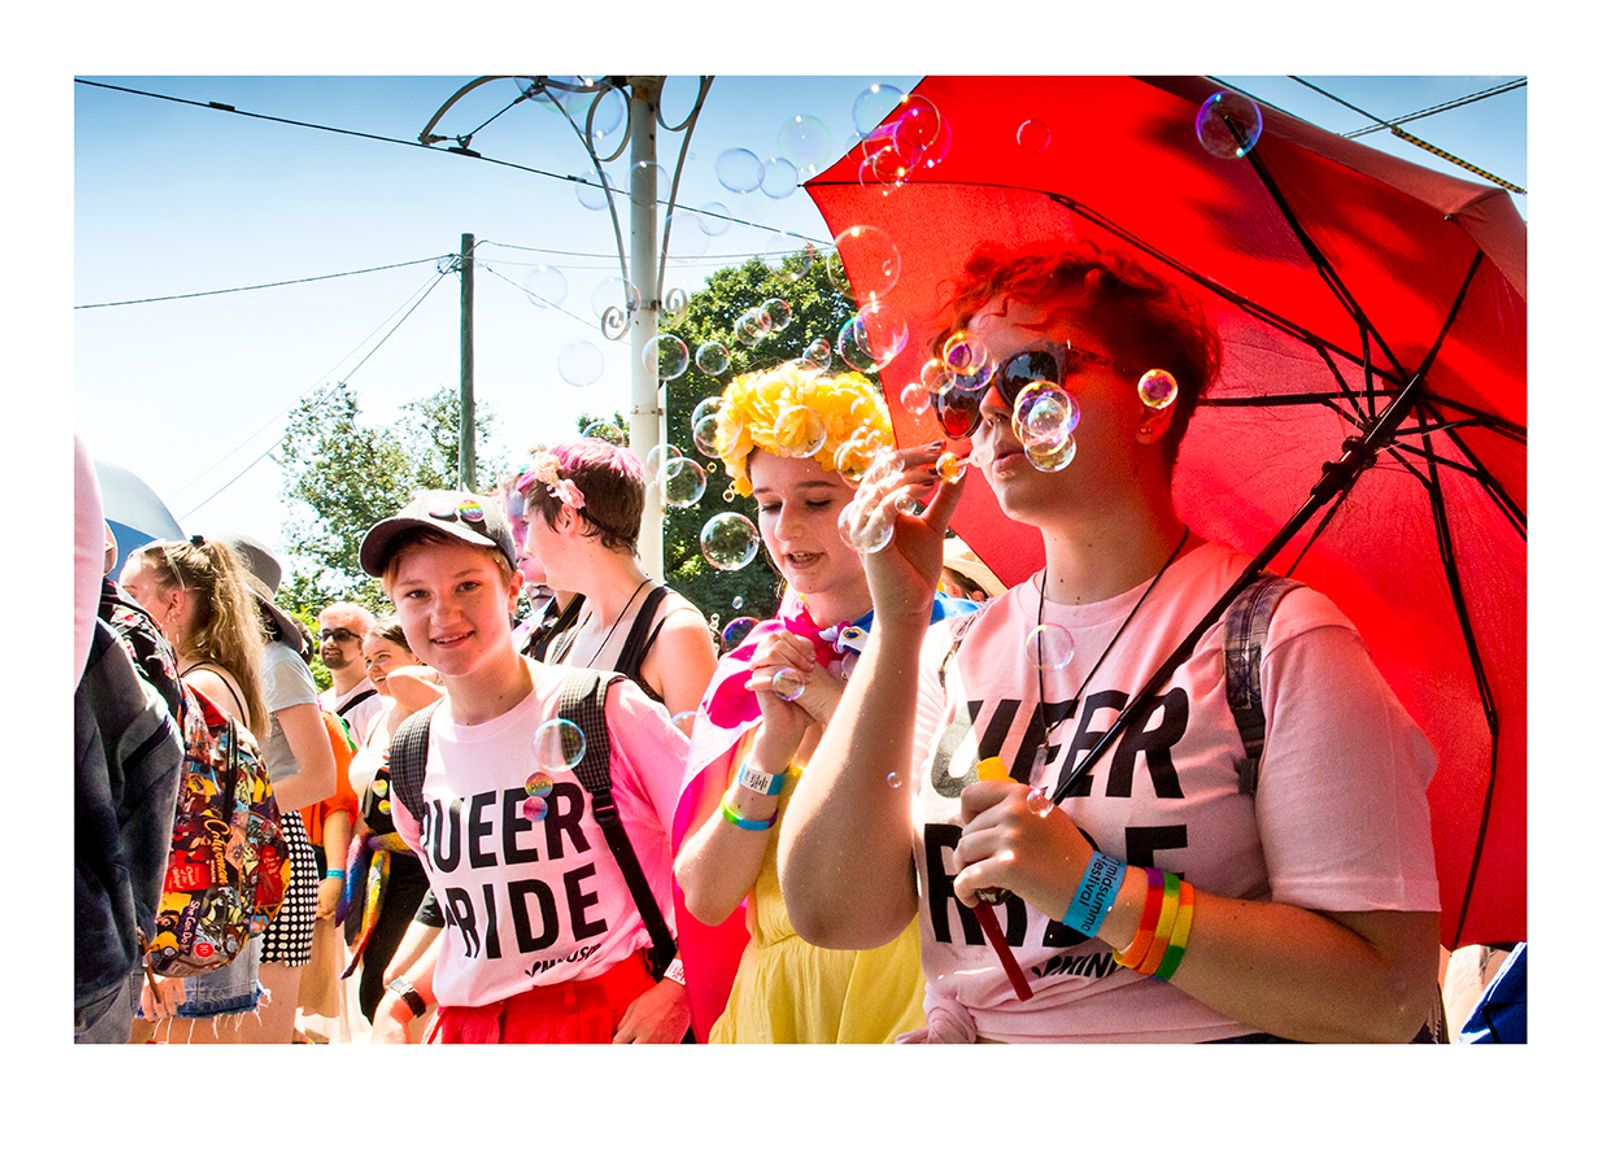 © MAYLEI HUNT - Queer Youth, Midsumma Pride March, Melbourne Australia 2018